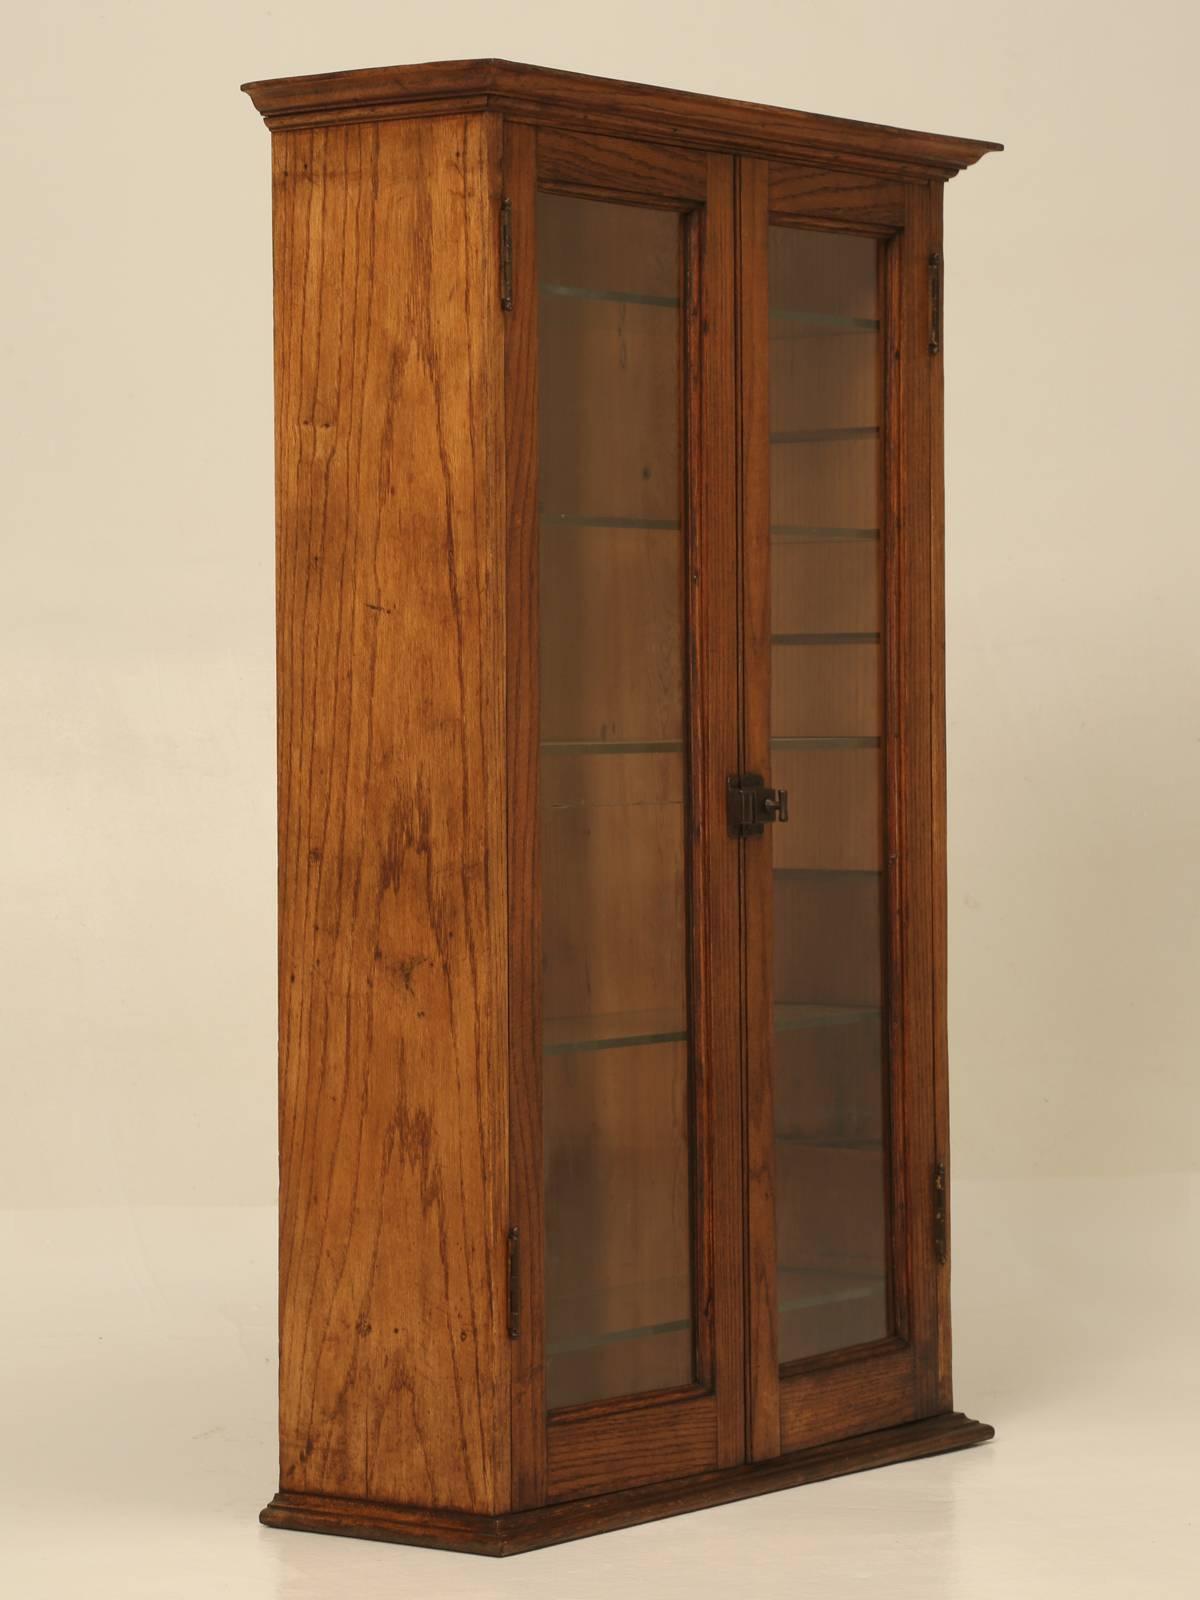 Very nice old American oak hanging, or free standing glass bookcase, or curio cabinet. All original and never buggered about with, but please note the perfectly horizontal crack in the door glass. Probably made in the early 1900s.